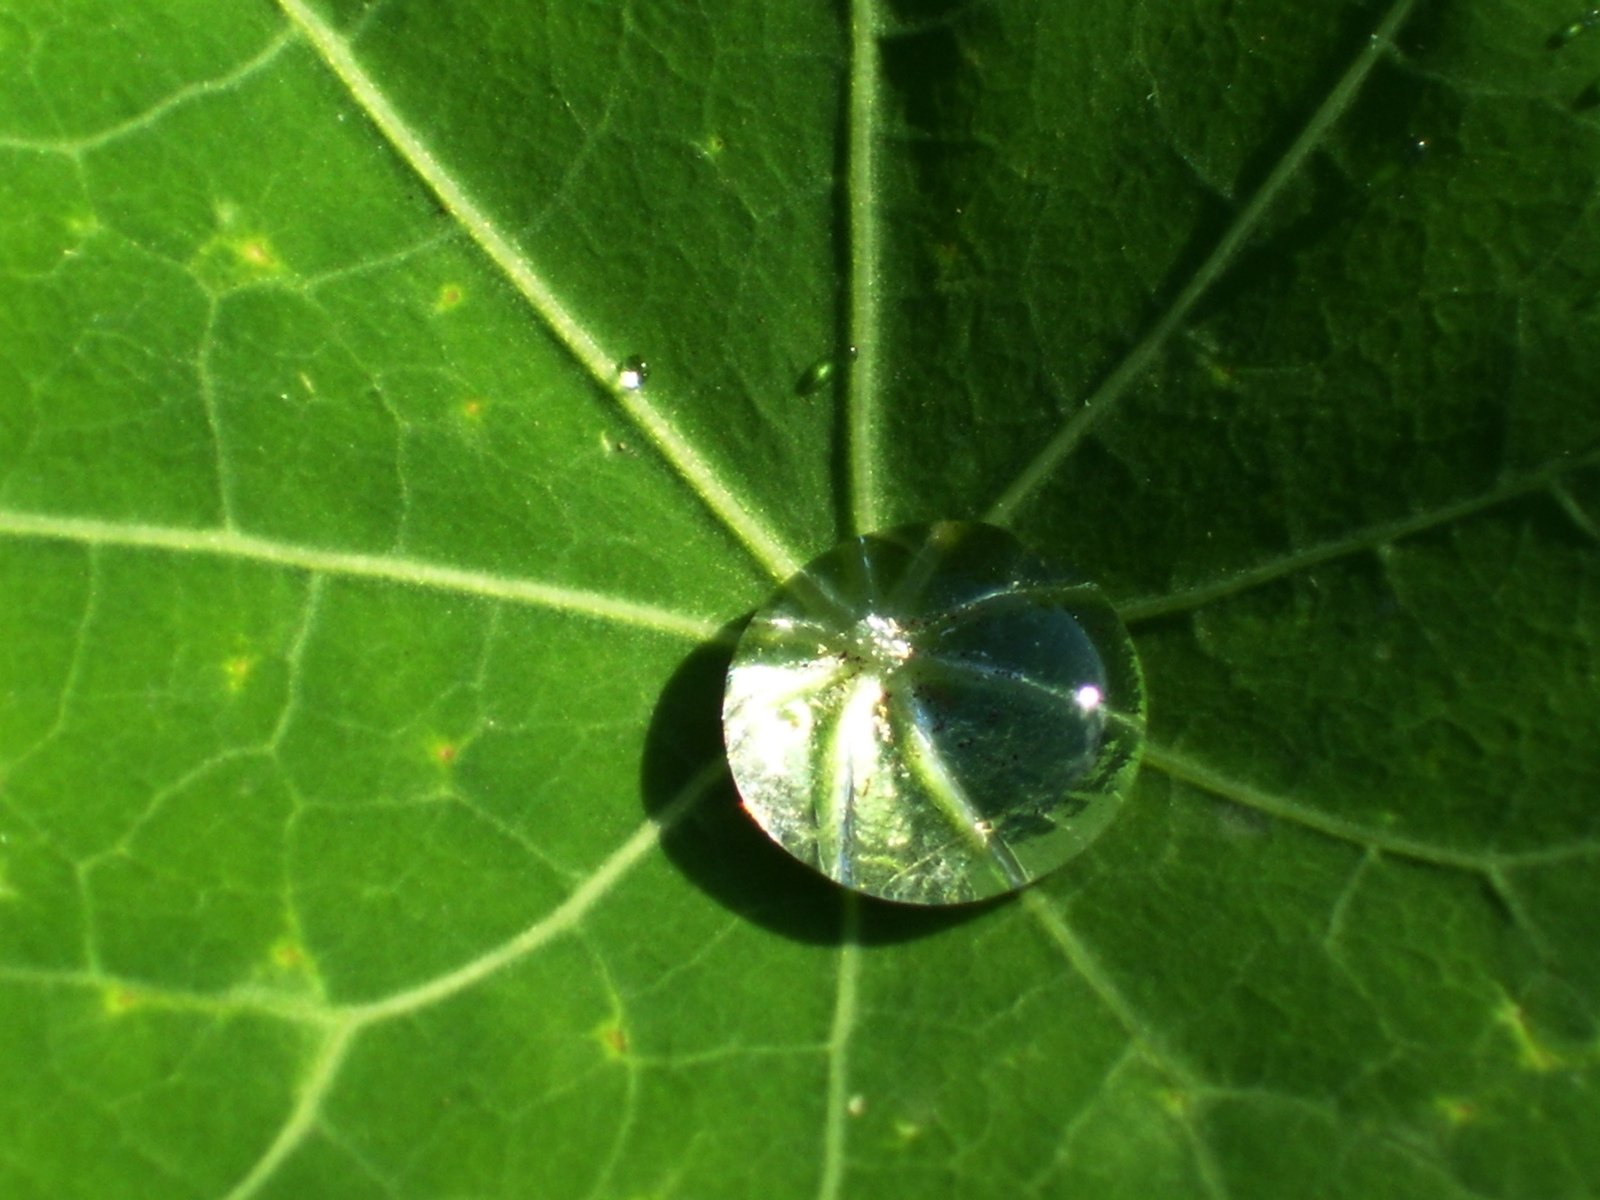 water drops from a droplet on the top of a leaf